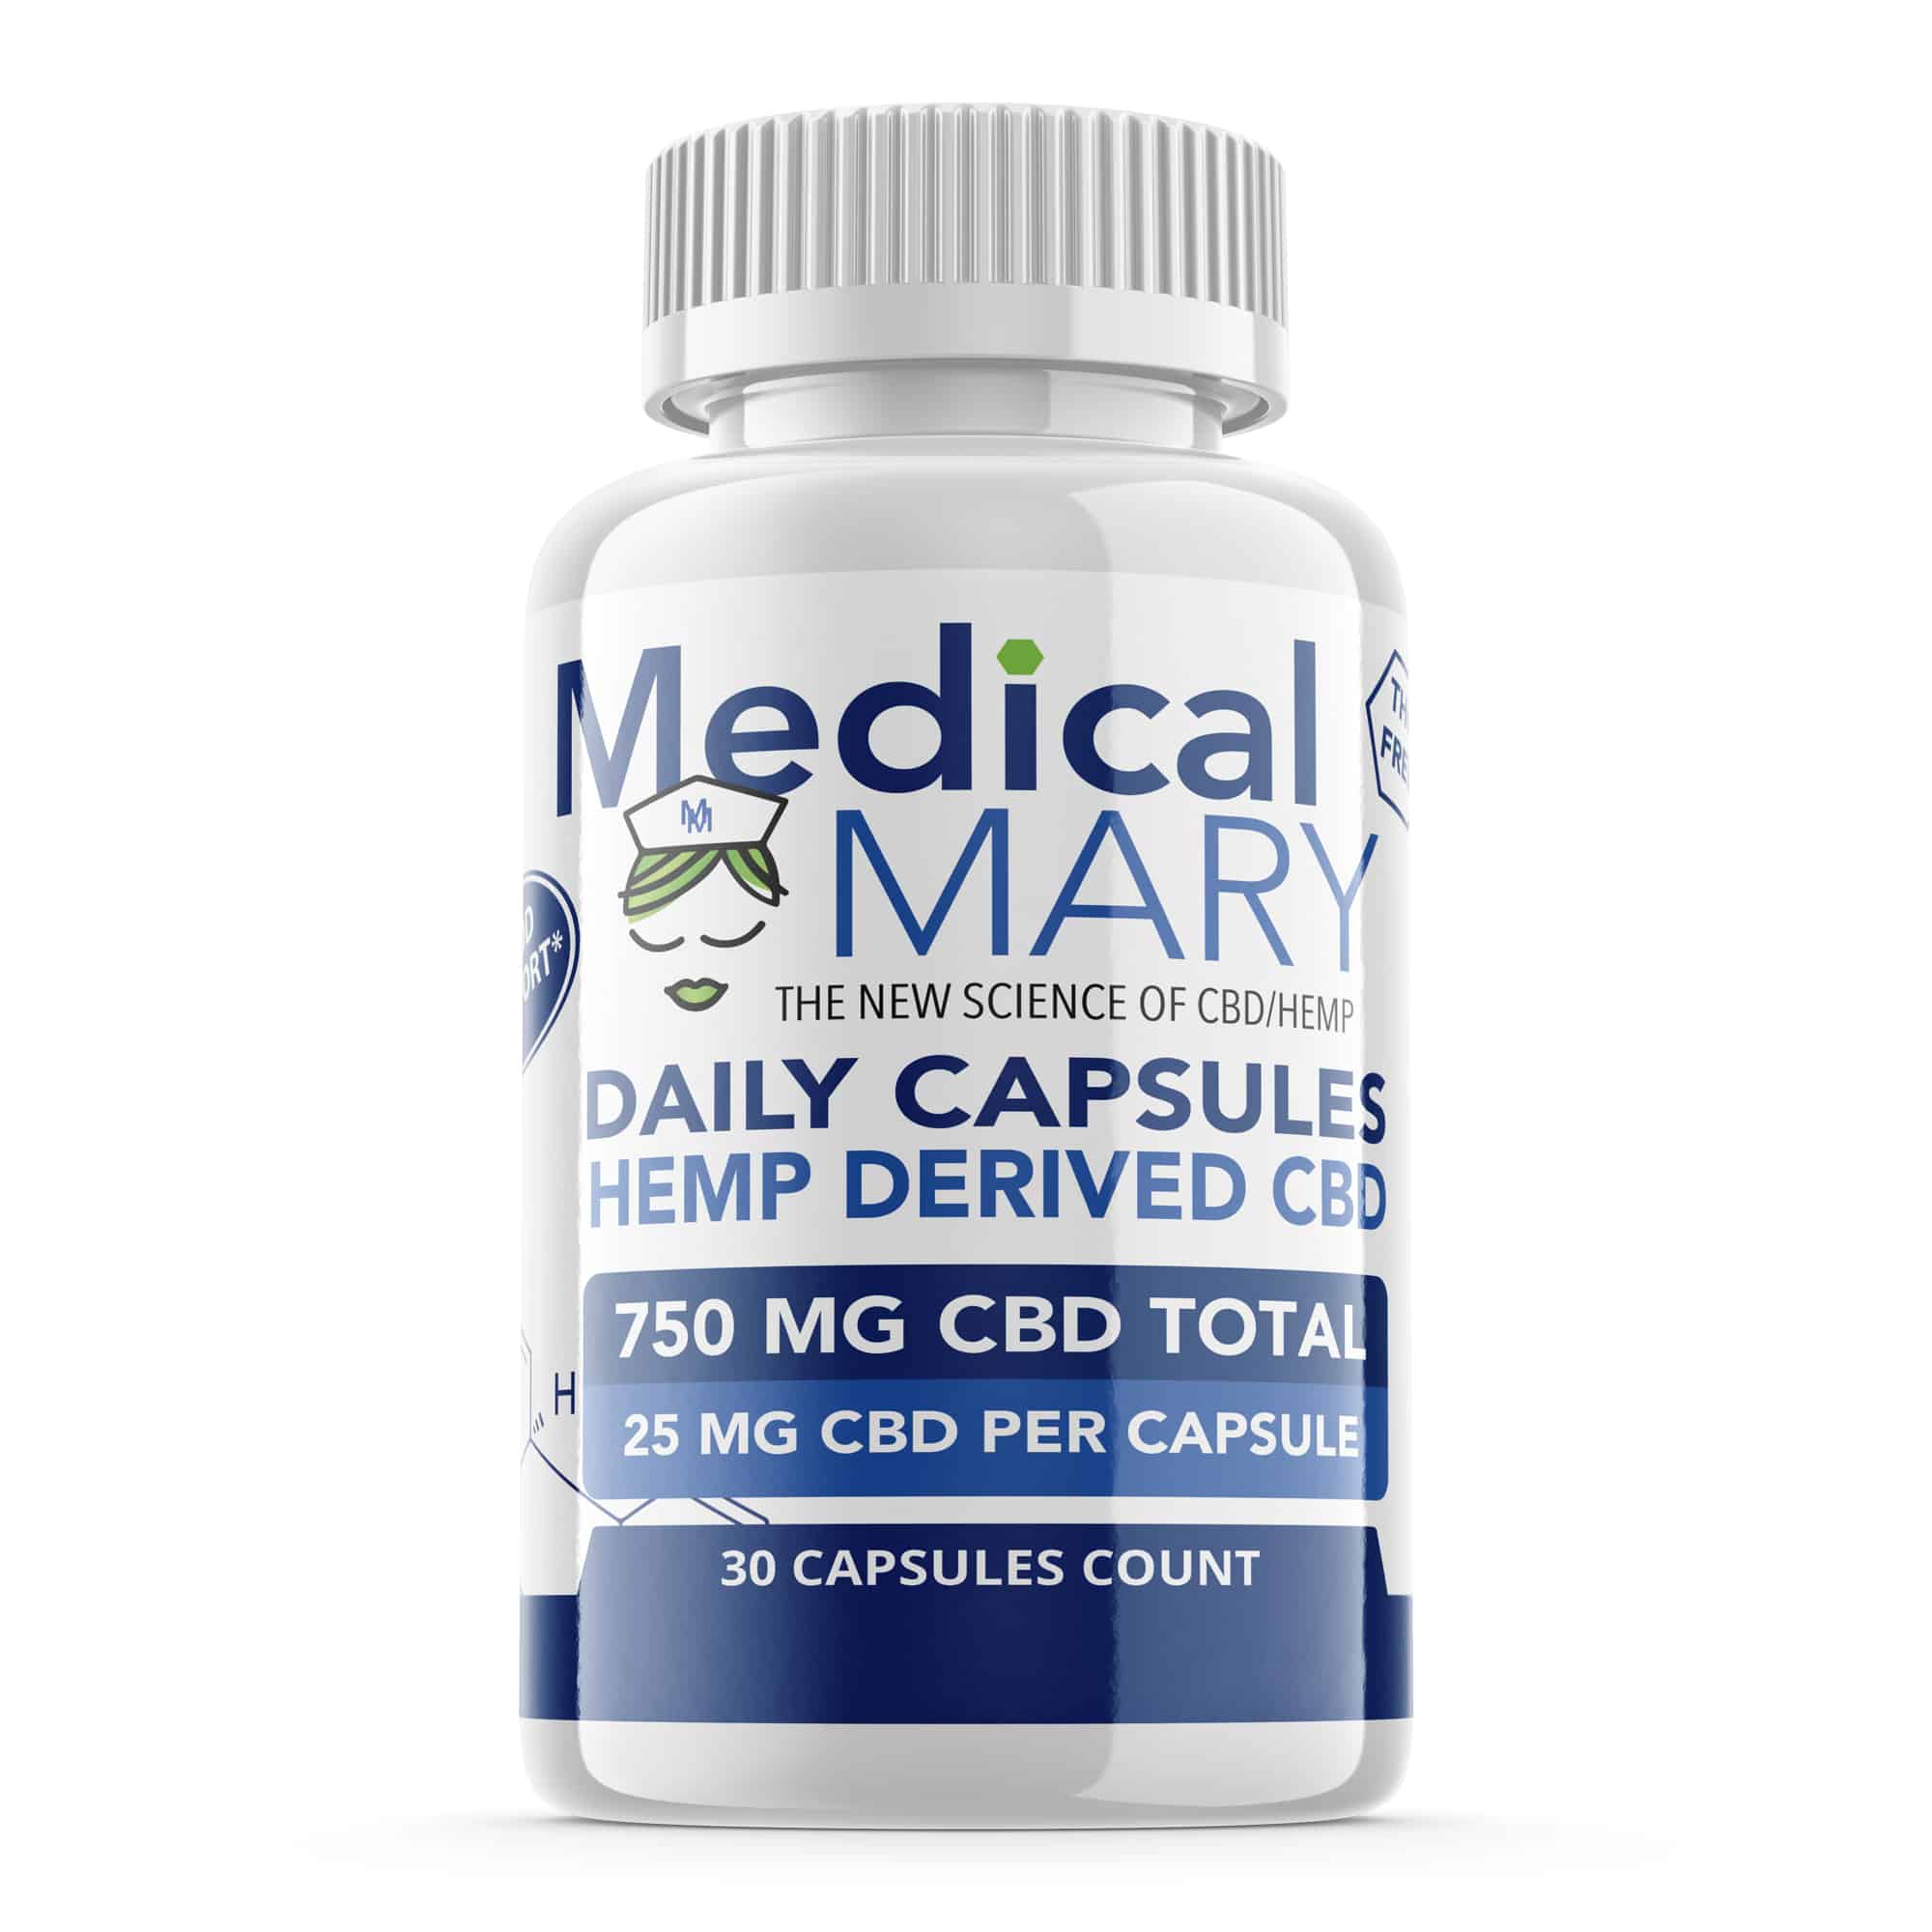 Best Daily Capsules CBD from Medical Mary